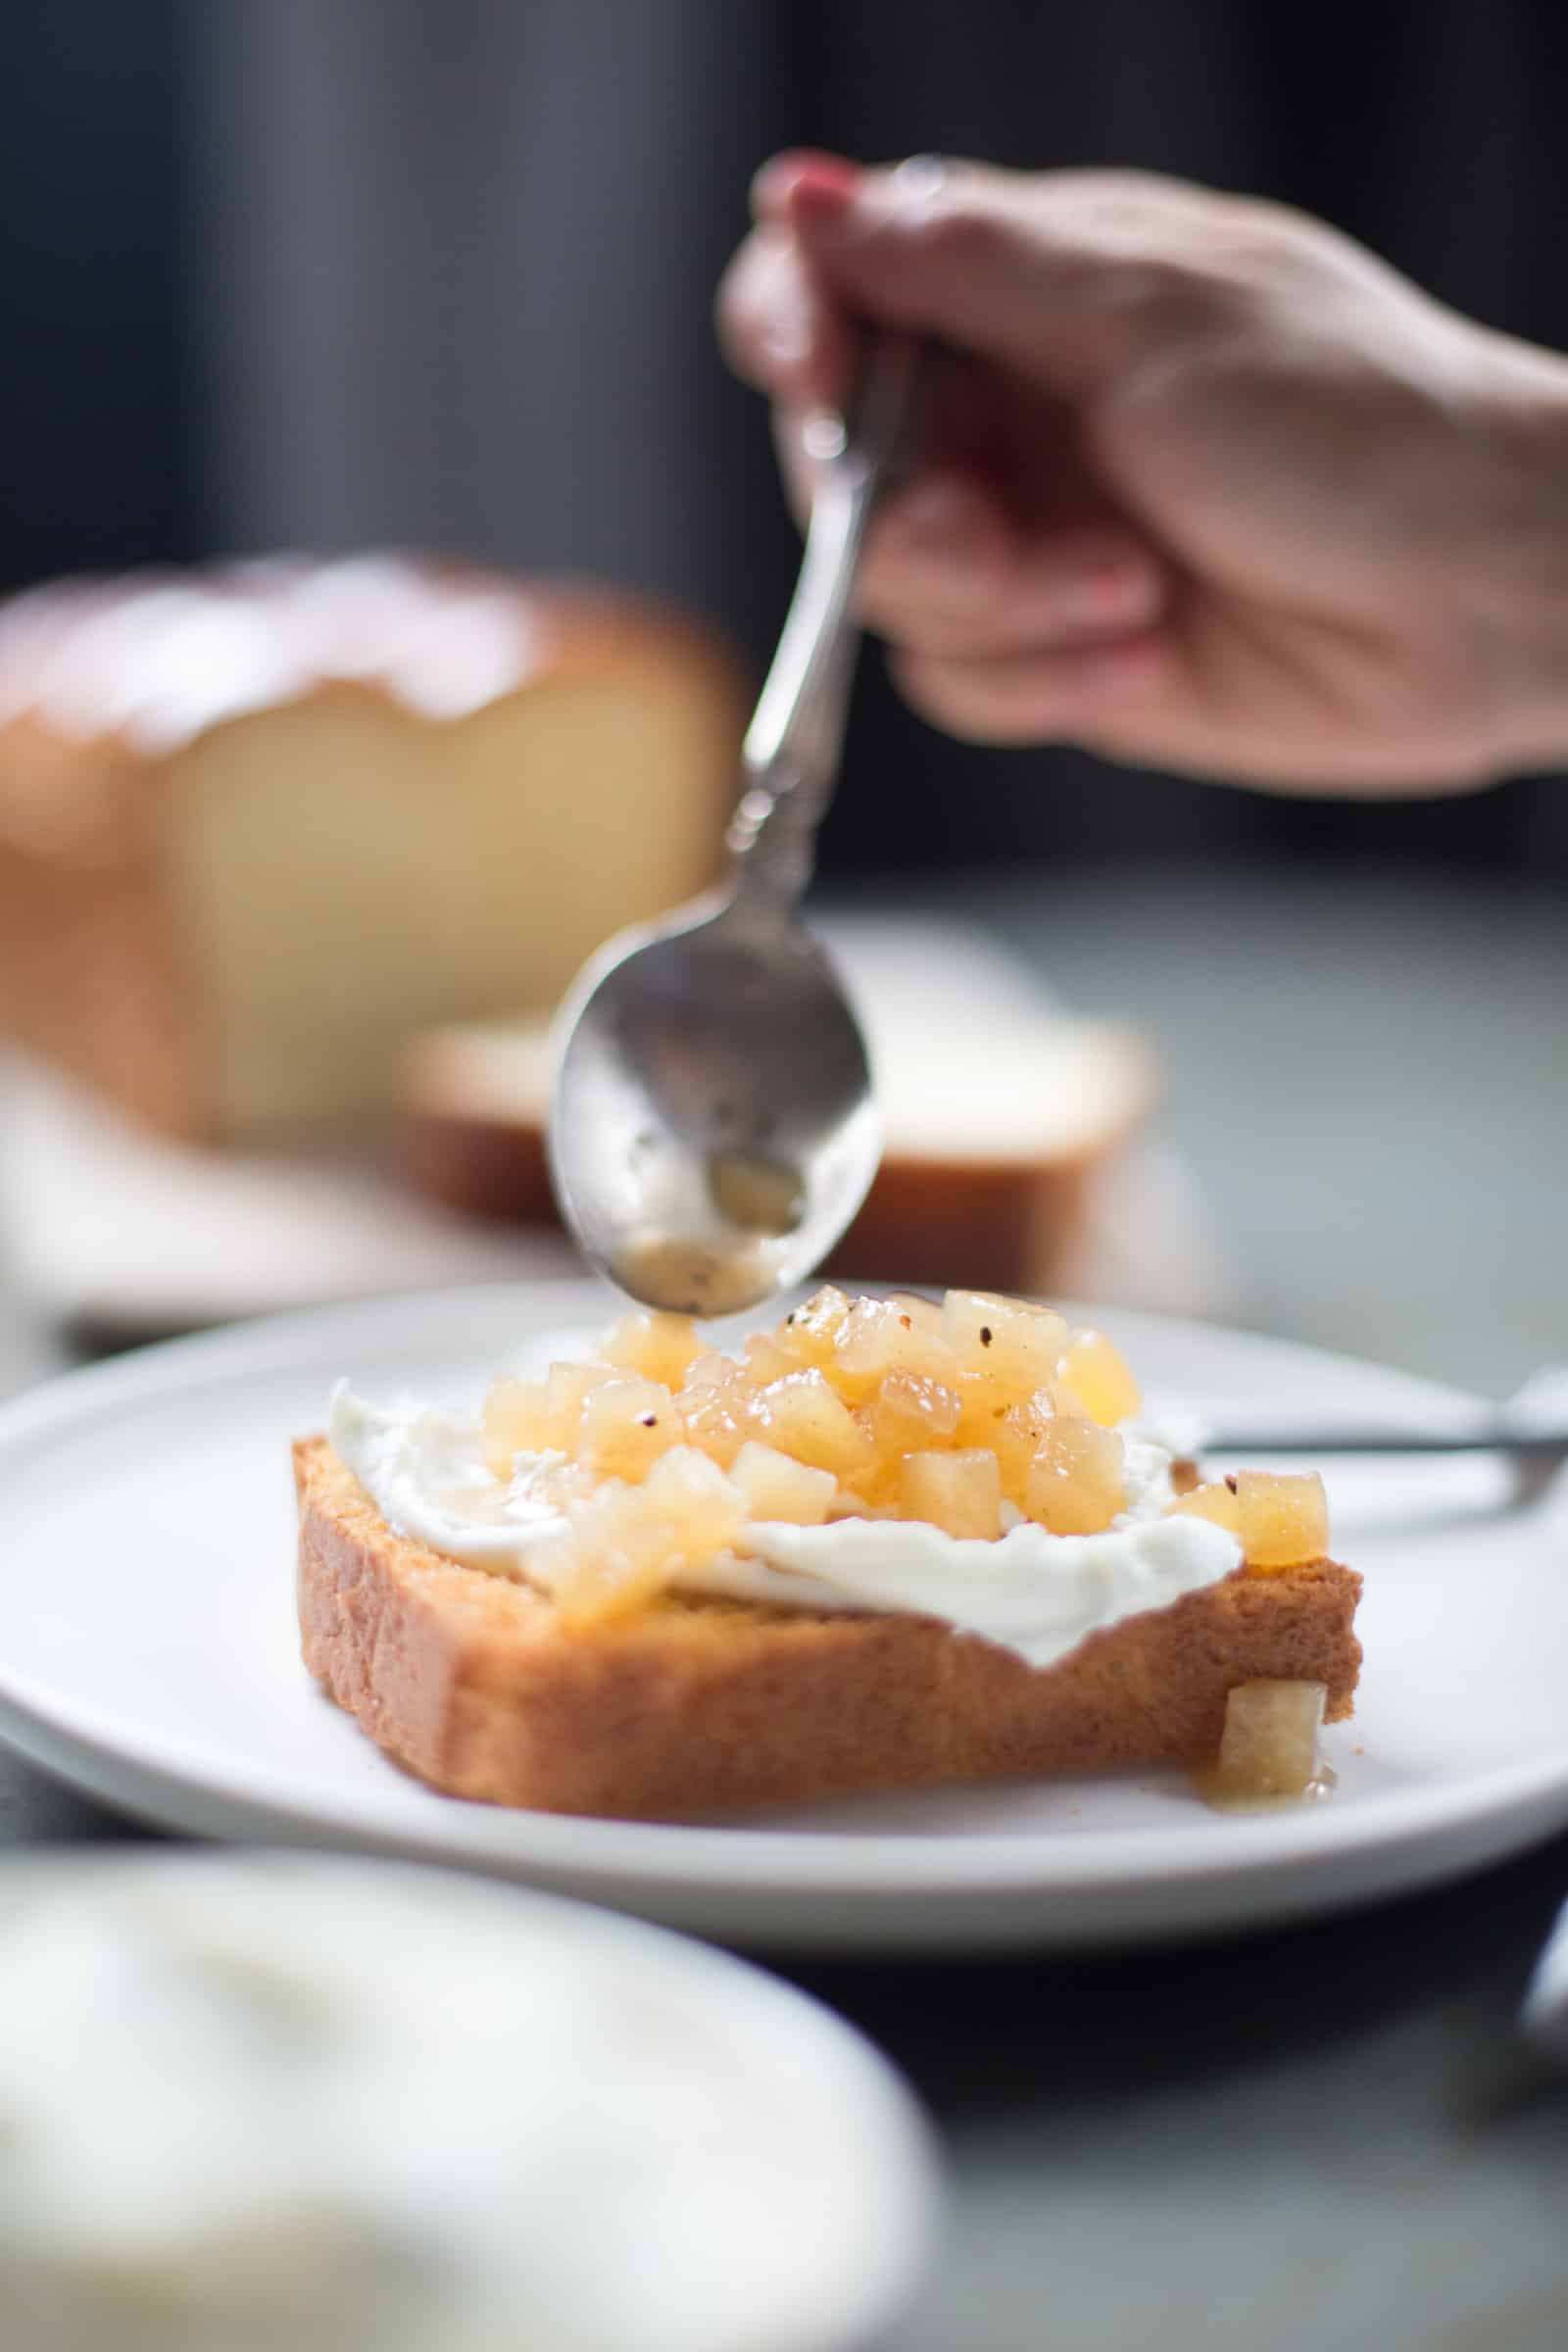 Asian Pear Compote Whipped Goat Cheese Brioche Recipe